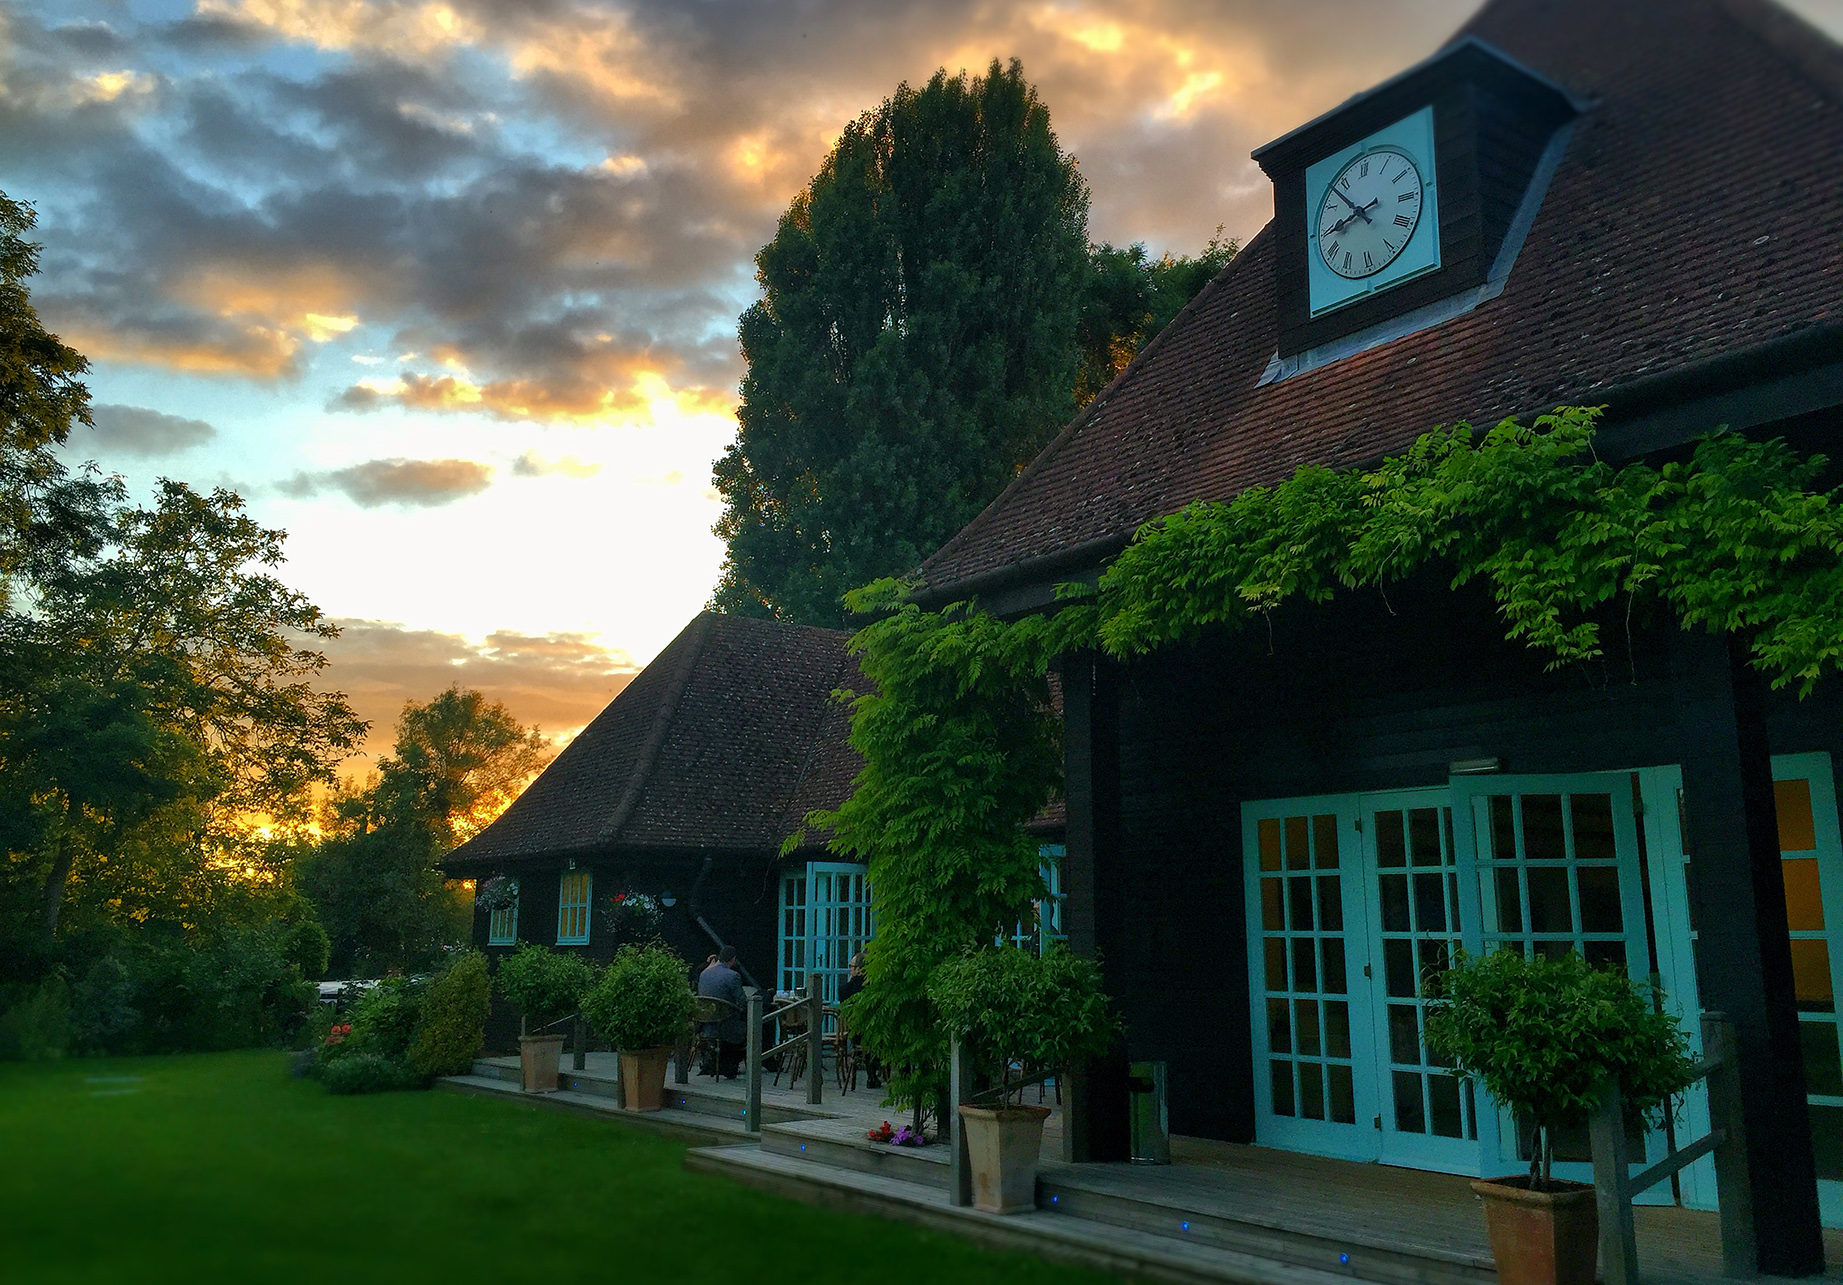  On the river Thames, Queens Eyot, a stunning island venue 